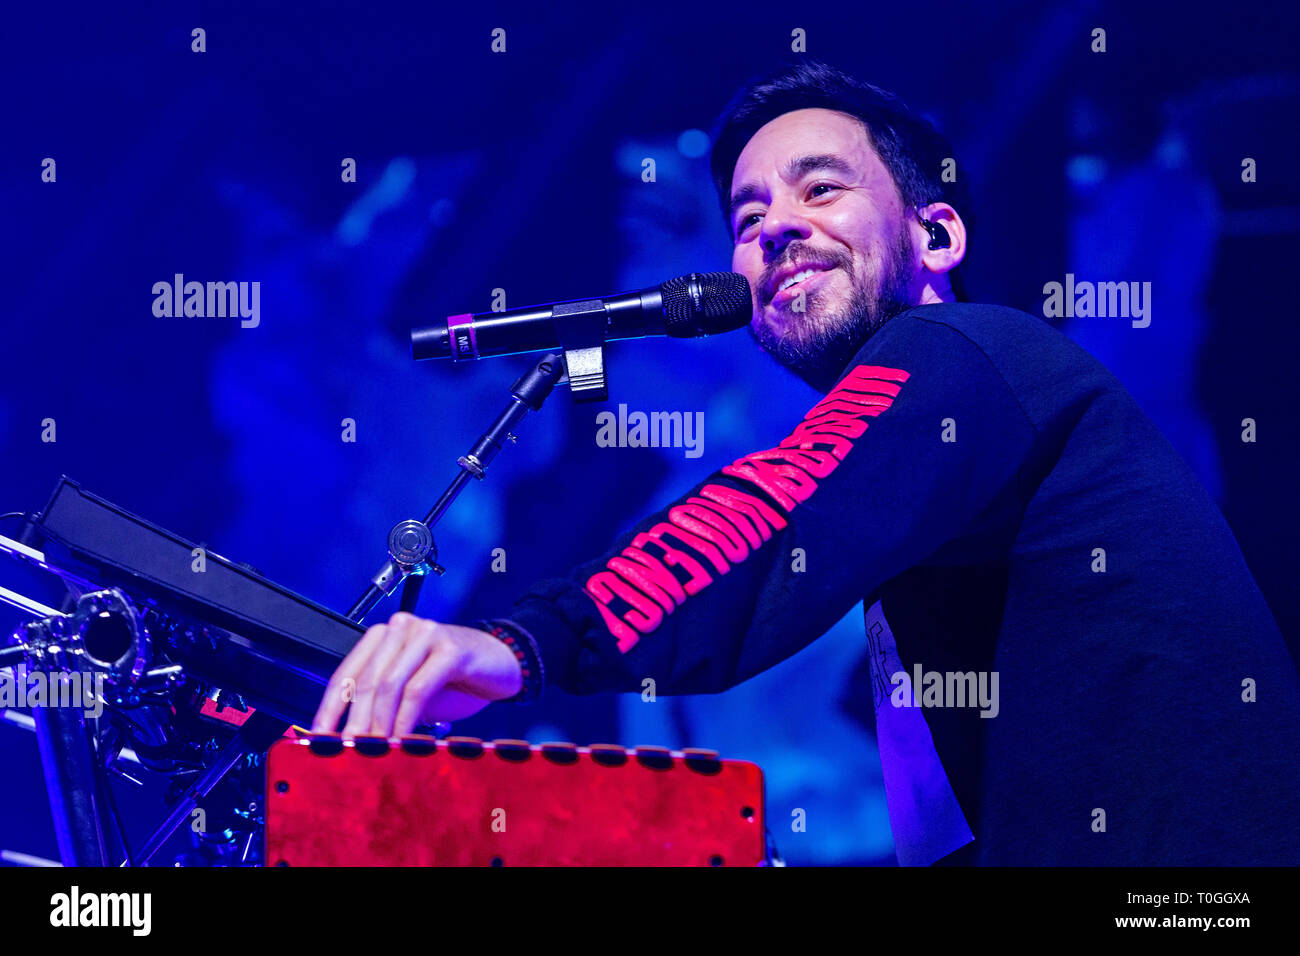 Mike Shinoda, singer of Linkin Park music band, performs during his show in which he presents his solo project, the Post Traumatic album, on March 19, Stock Photo